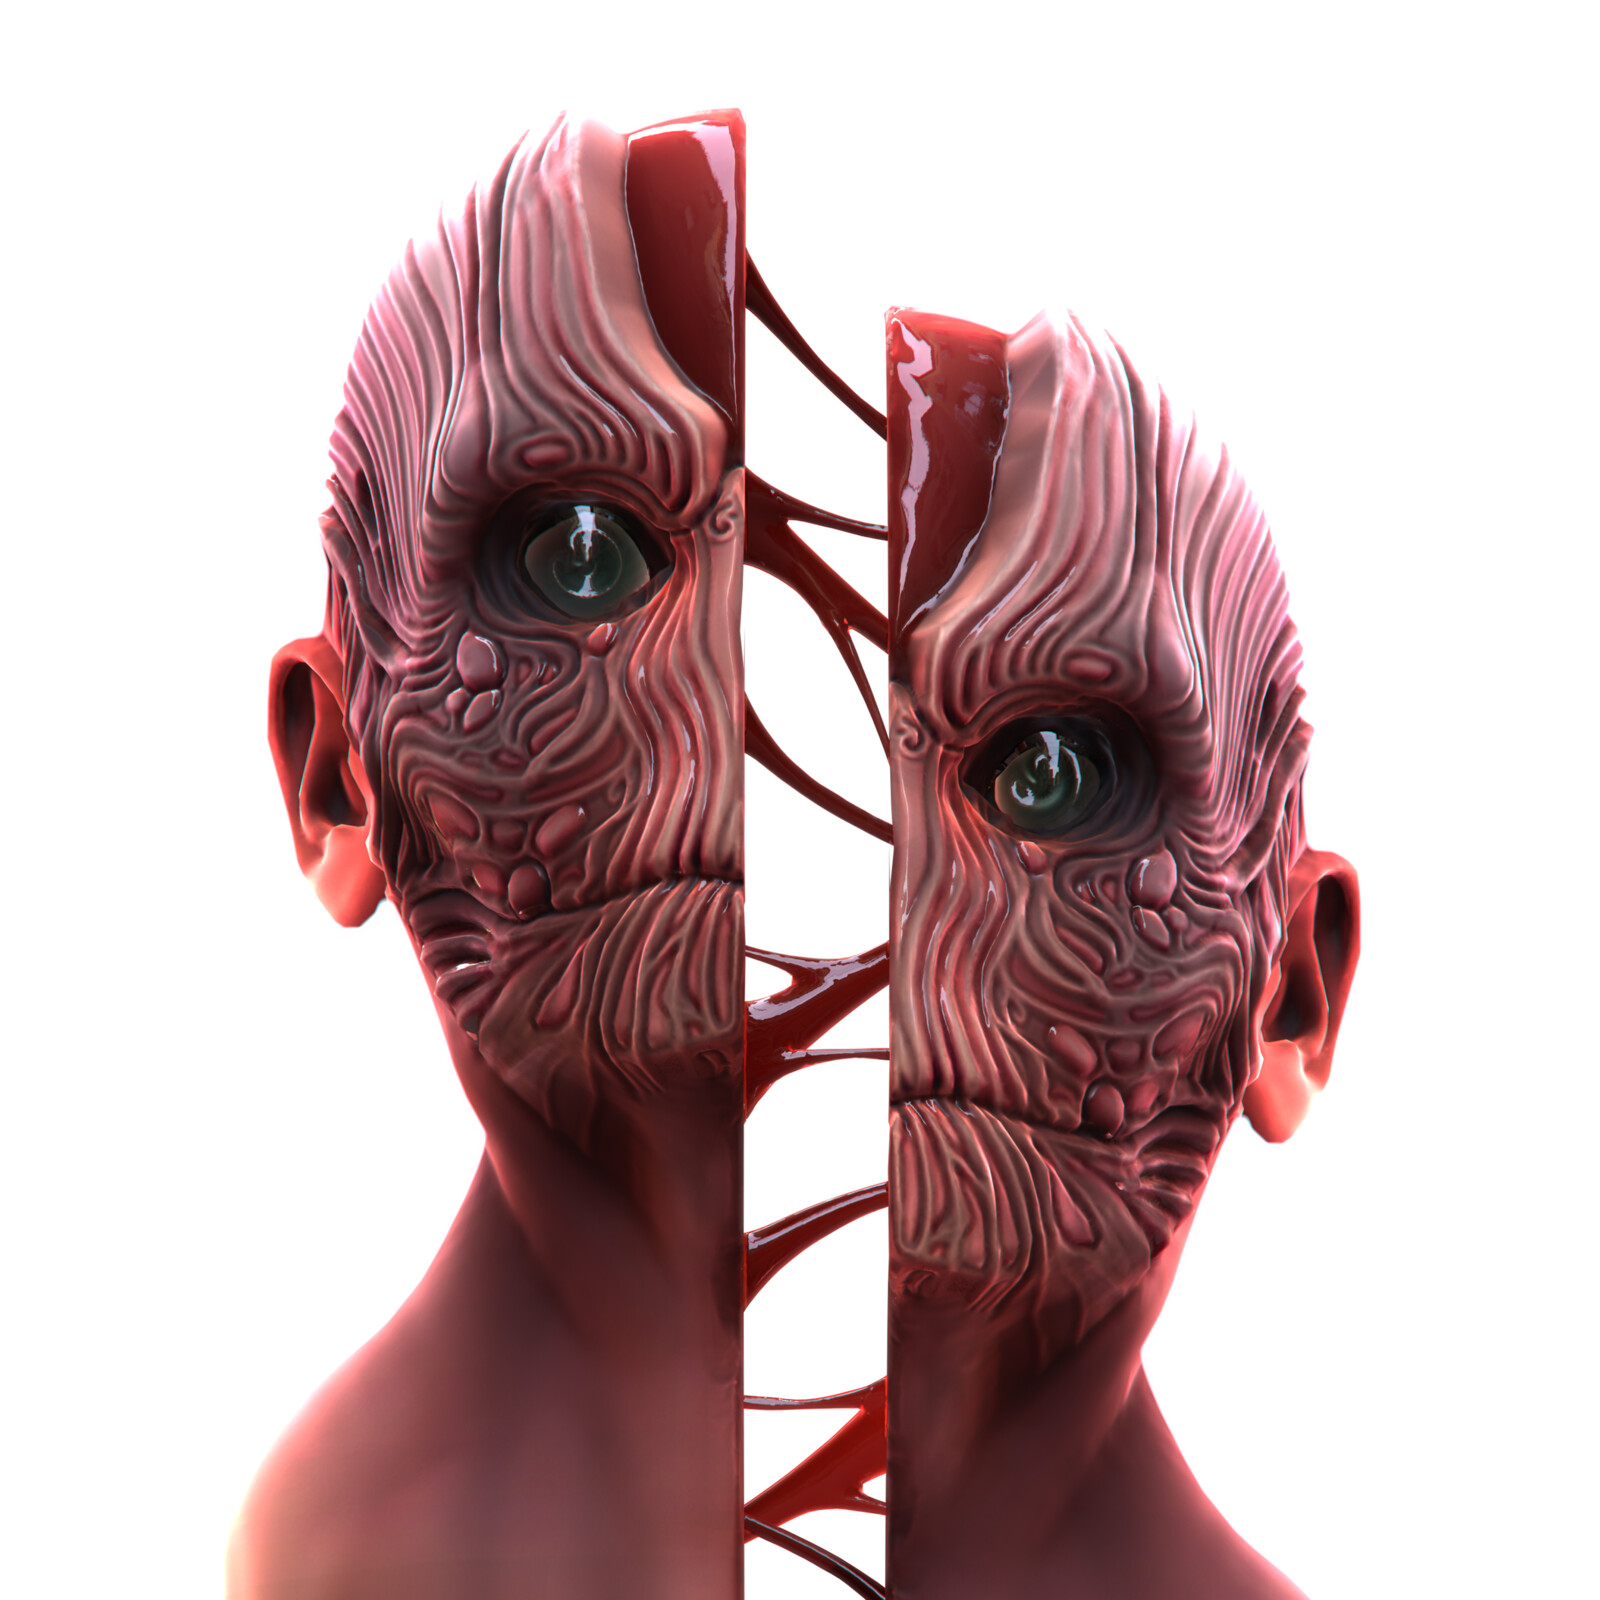 Separated By Flesh - Zbrush Doodle 01